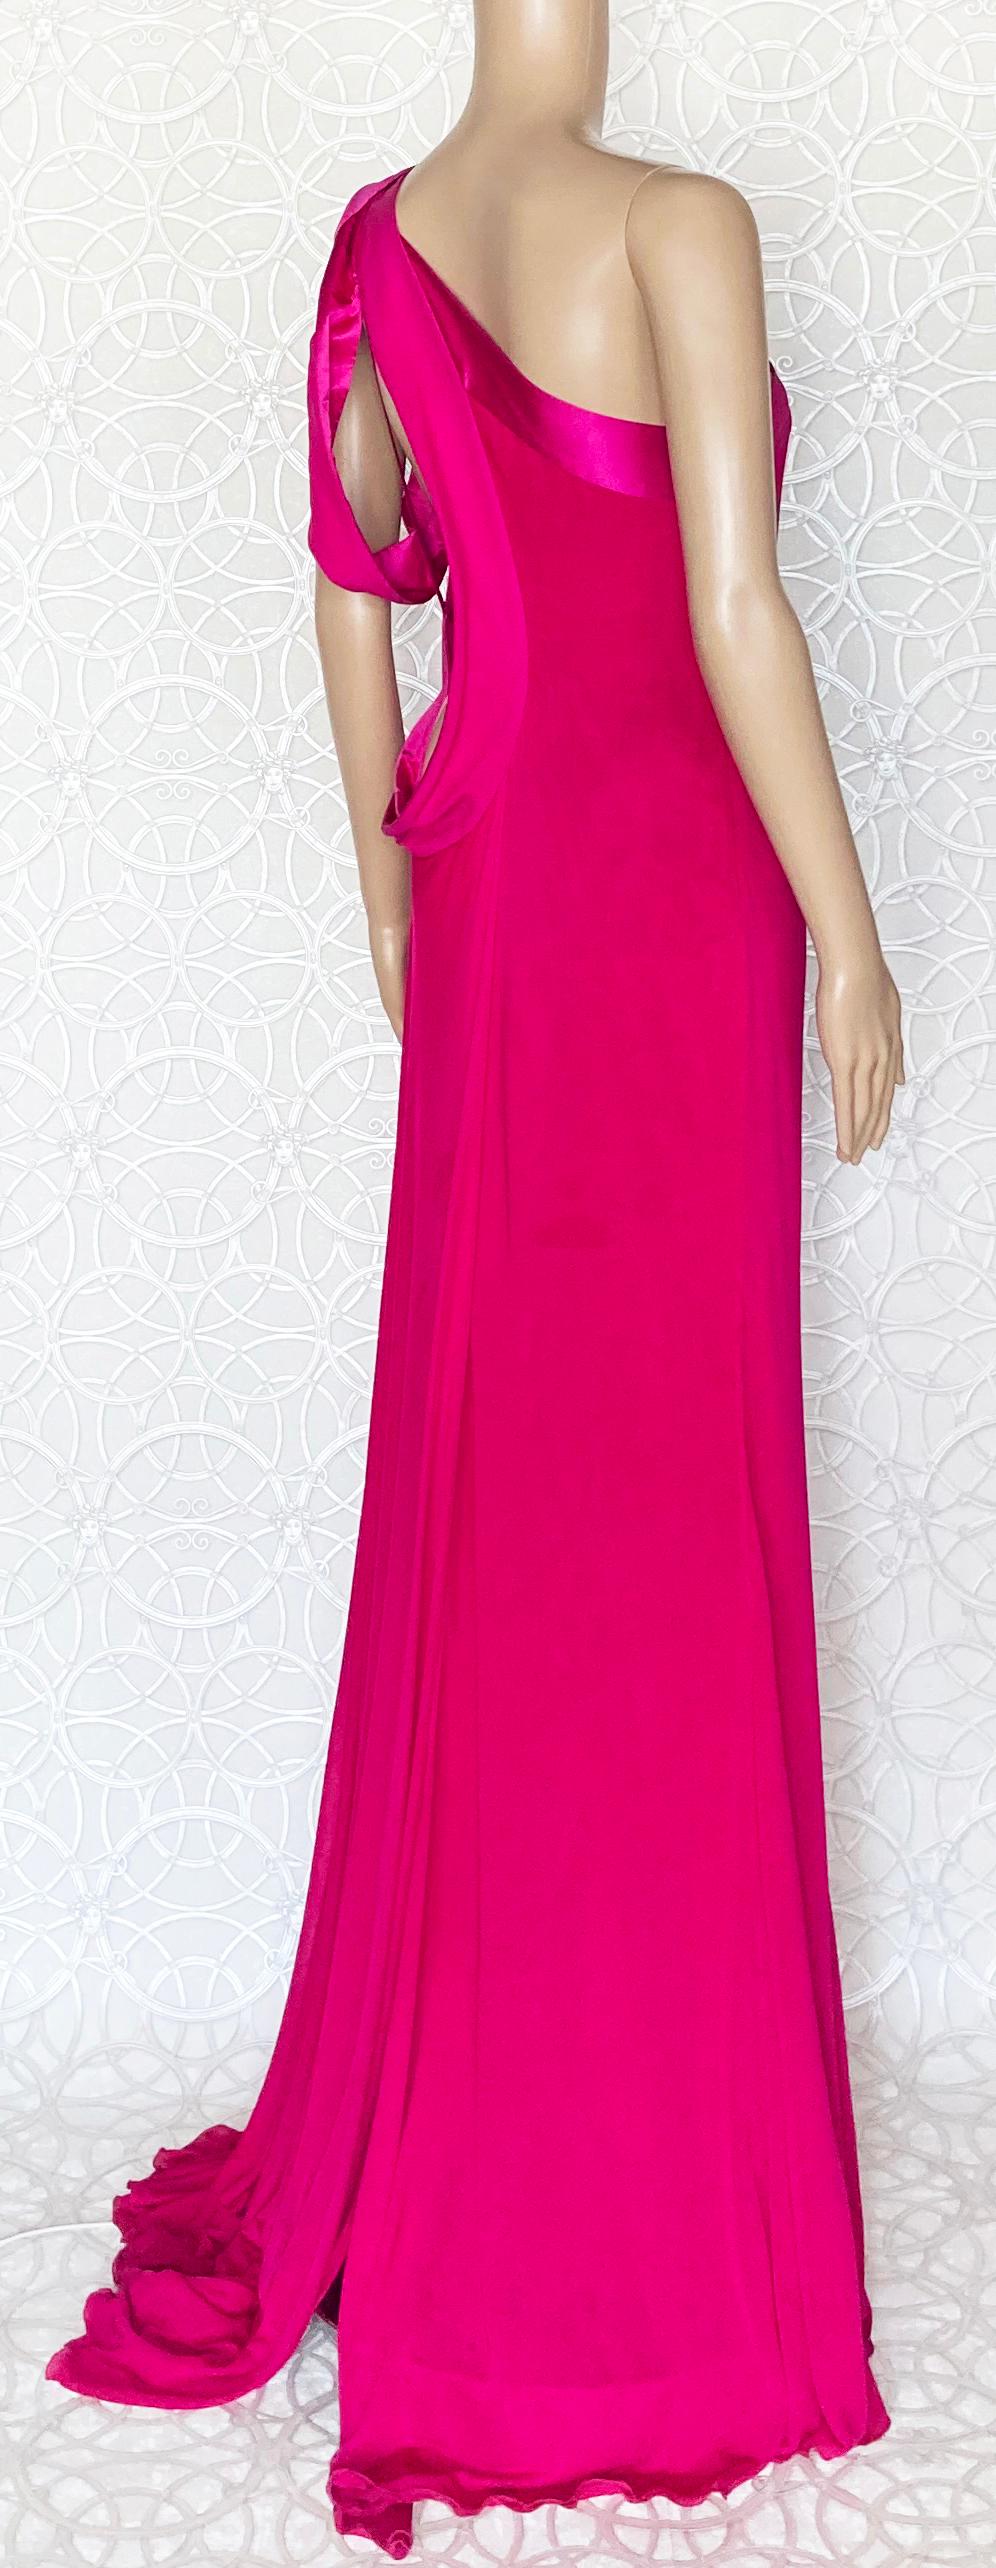 NEW VERSACE FUCHSIA SILK ONE SHOULDER OPEN BACK Gown 44 - 8 For Sale 2